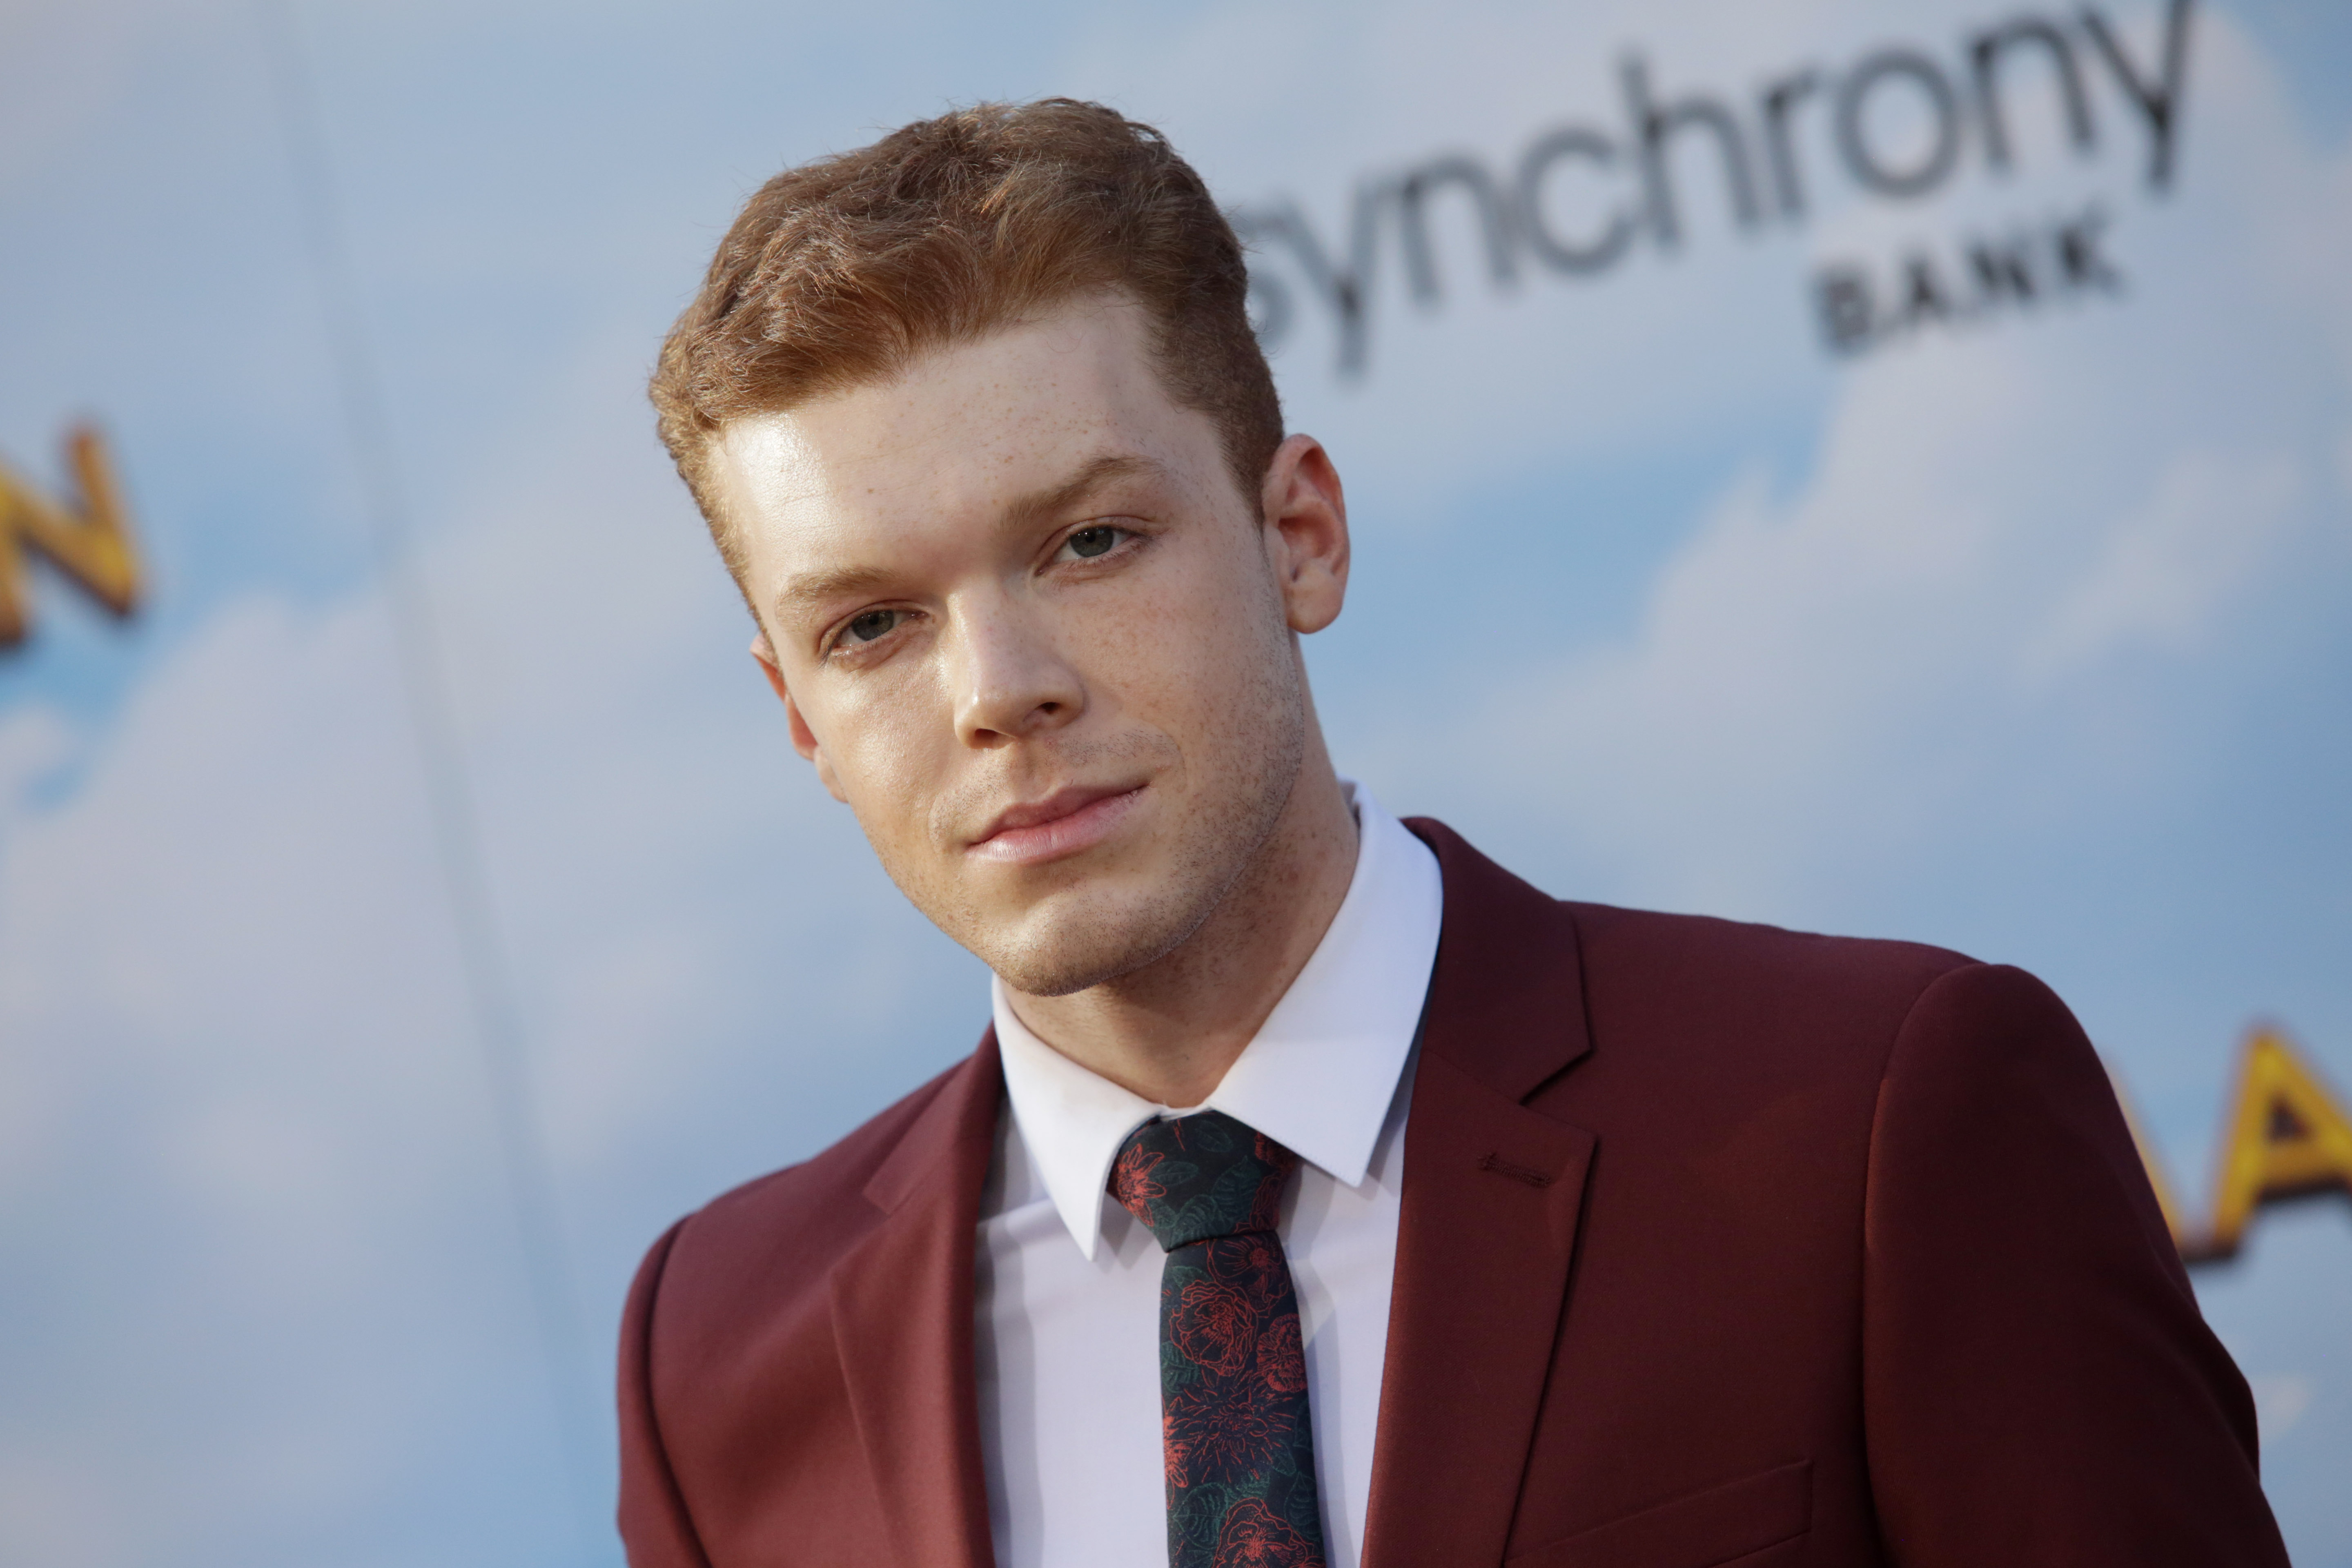 Cameron Monaghan Net Worth 2021, Age, Height, Weight, Wife 